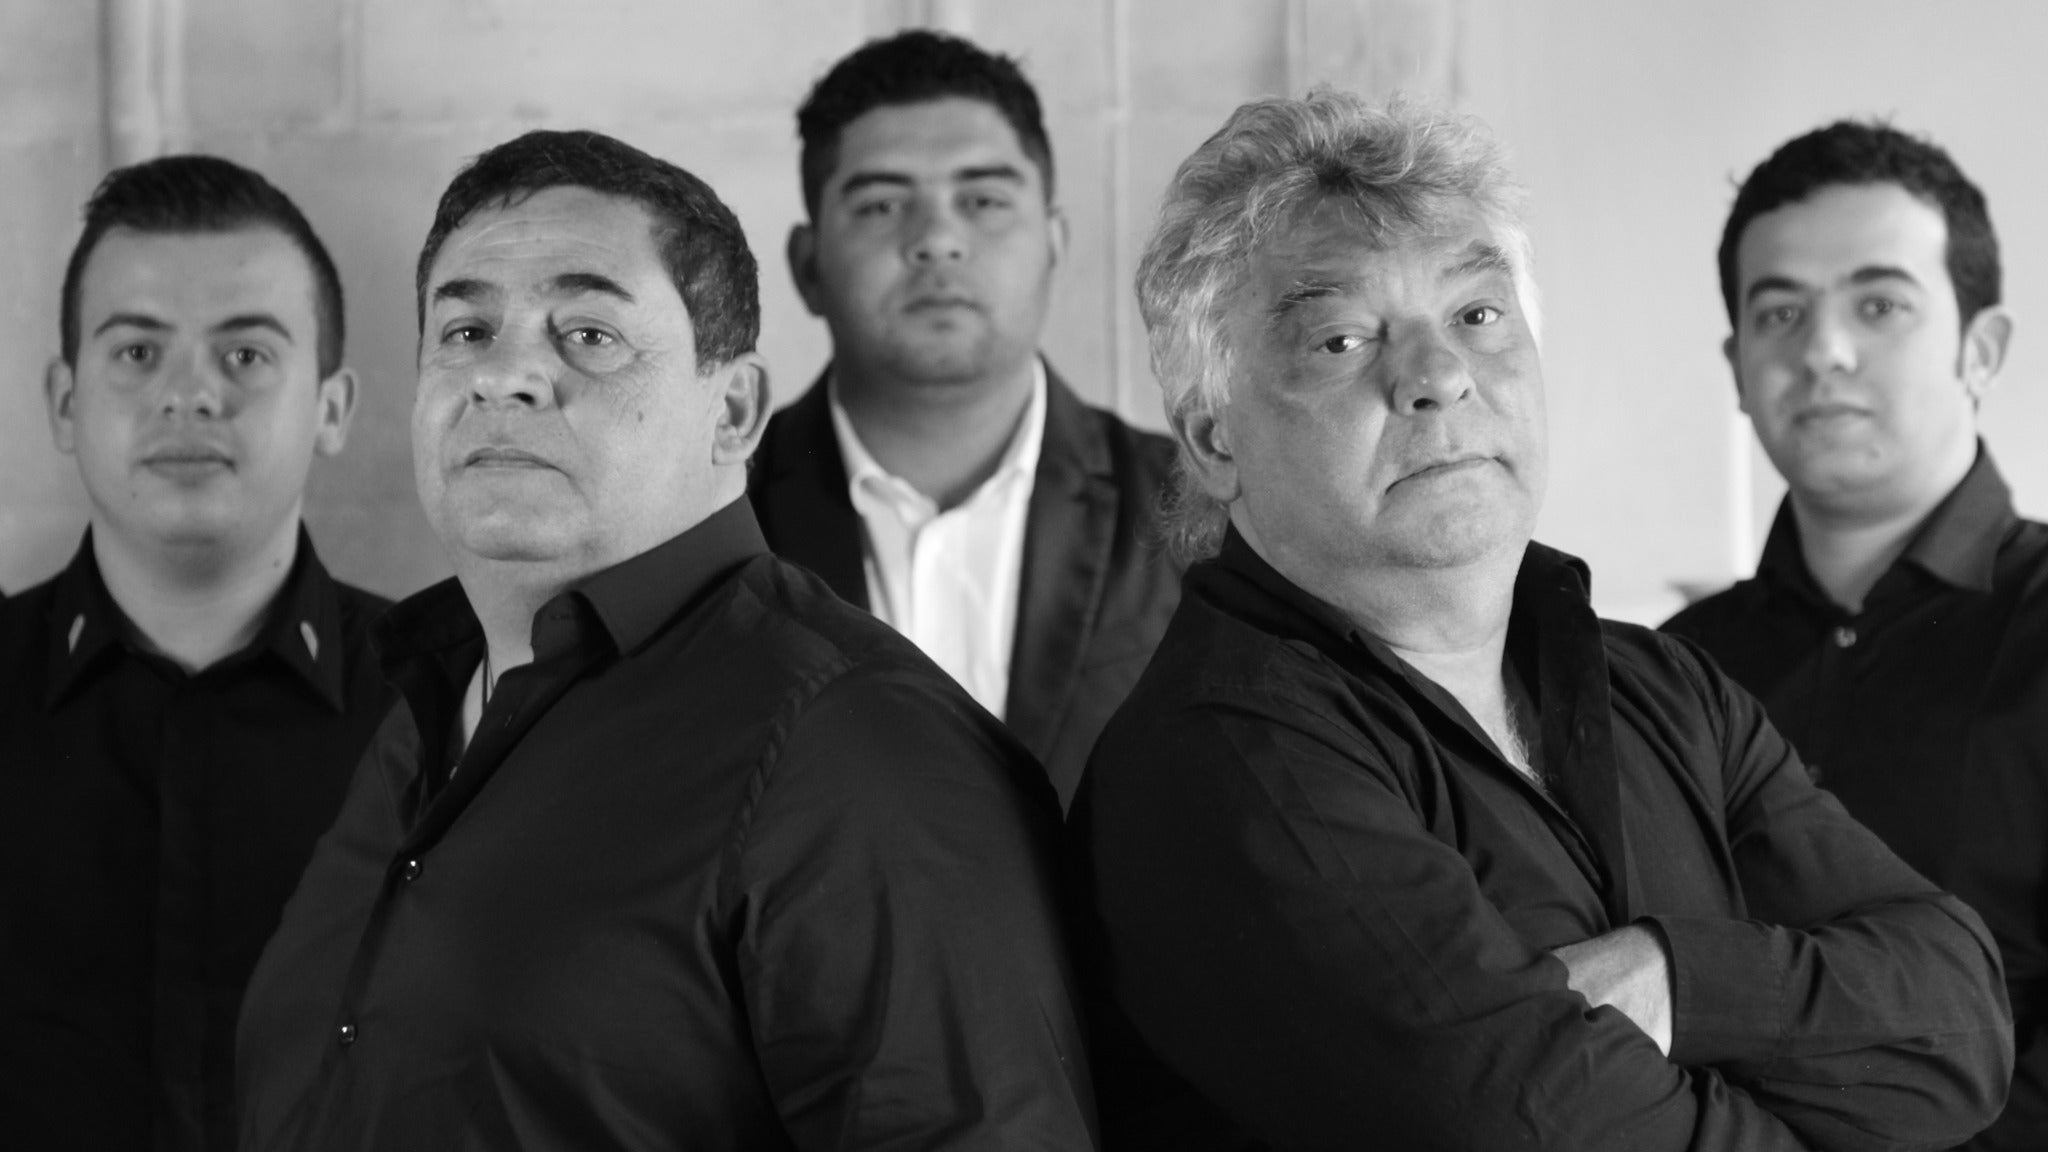 Image used with permission from Ticketmaster | Gipsy Kings featuring Nicolas Reyes tickets